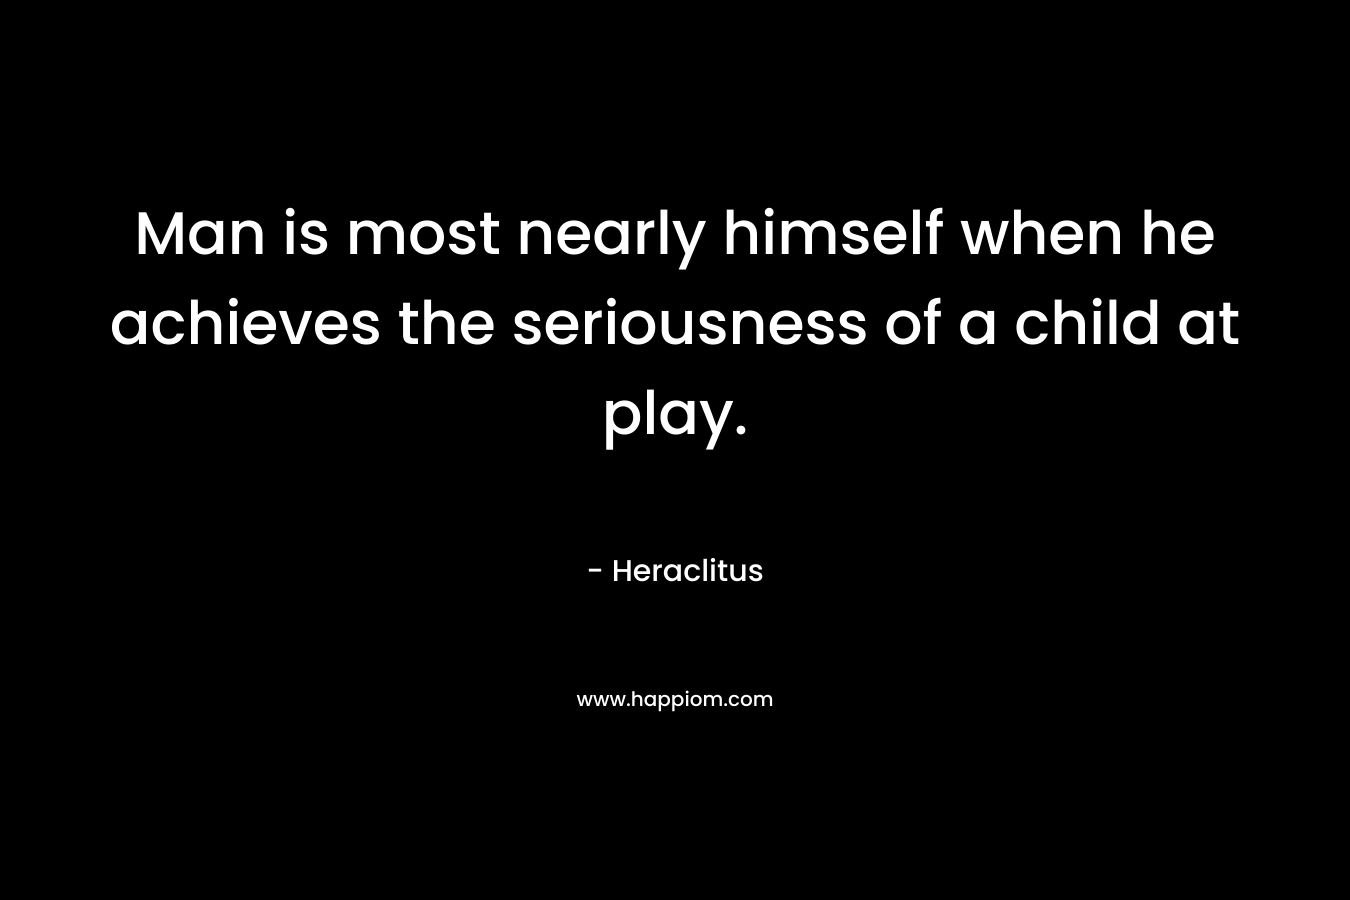 Man is most nearly himself when he achieves the seriousness of a child at play. – Heraclitus